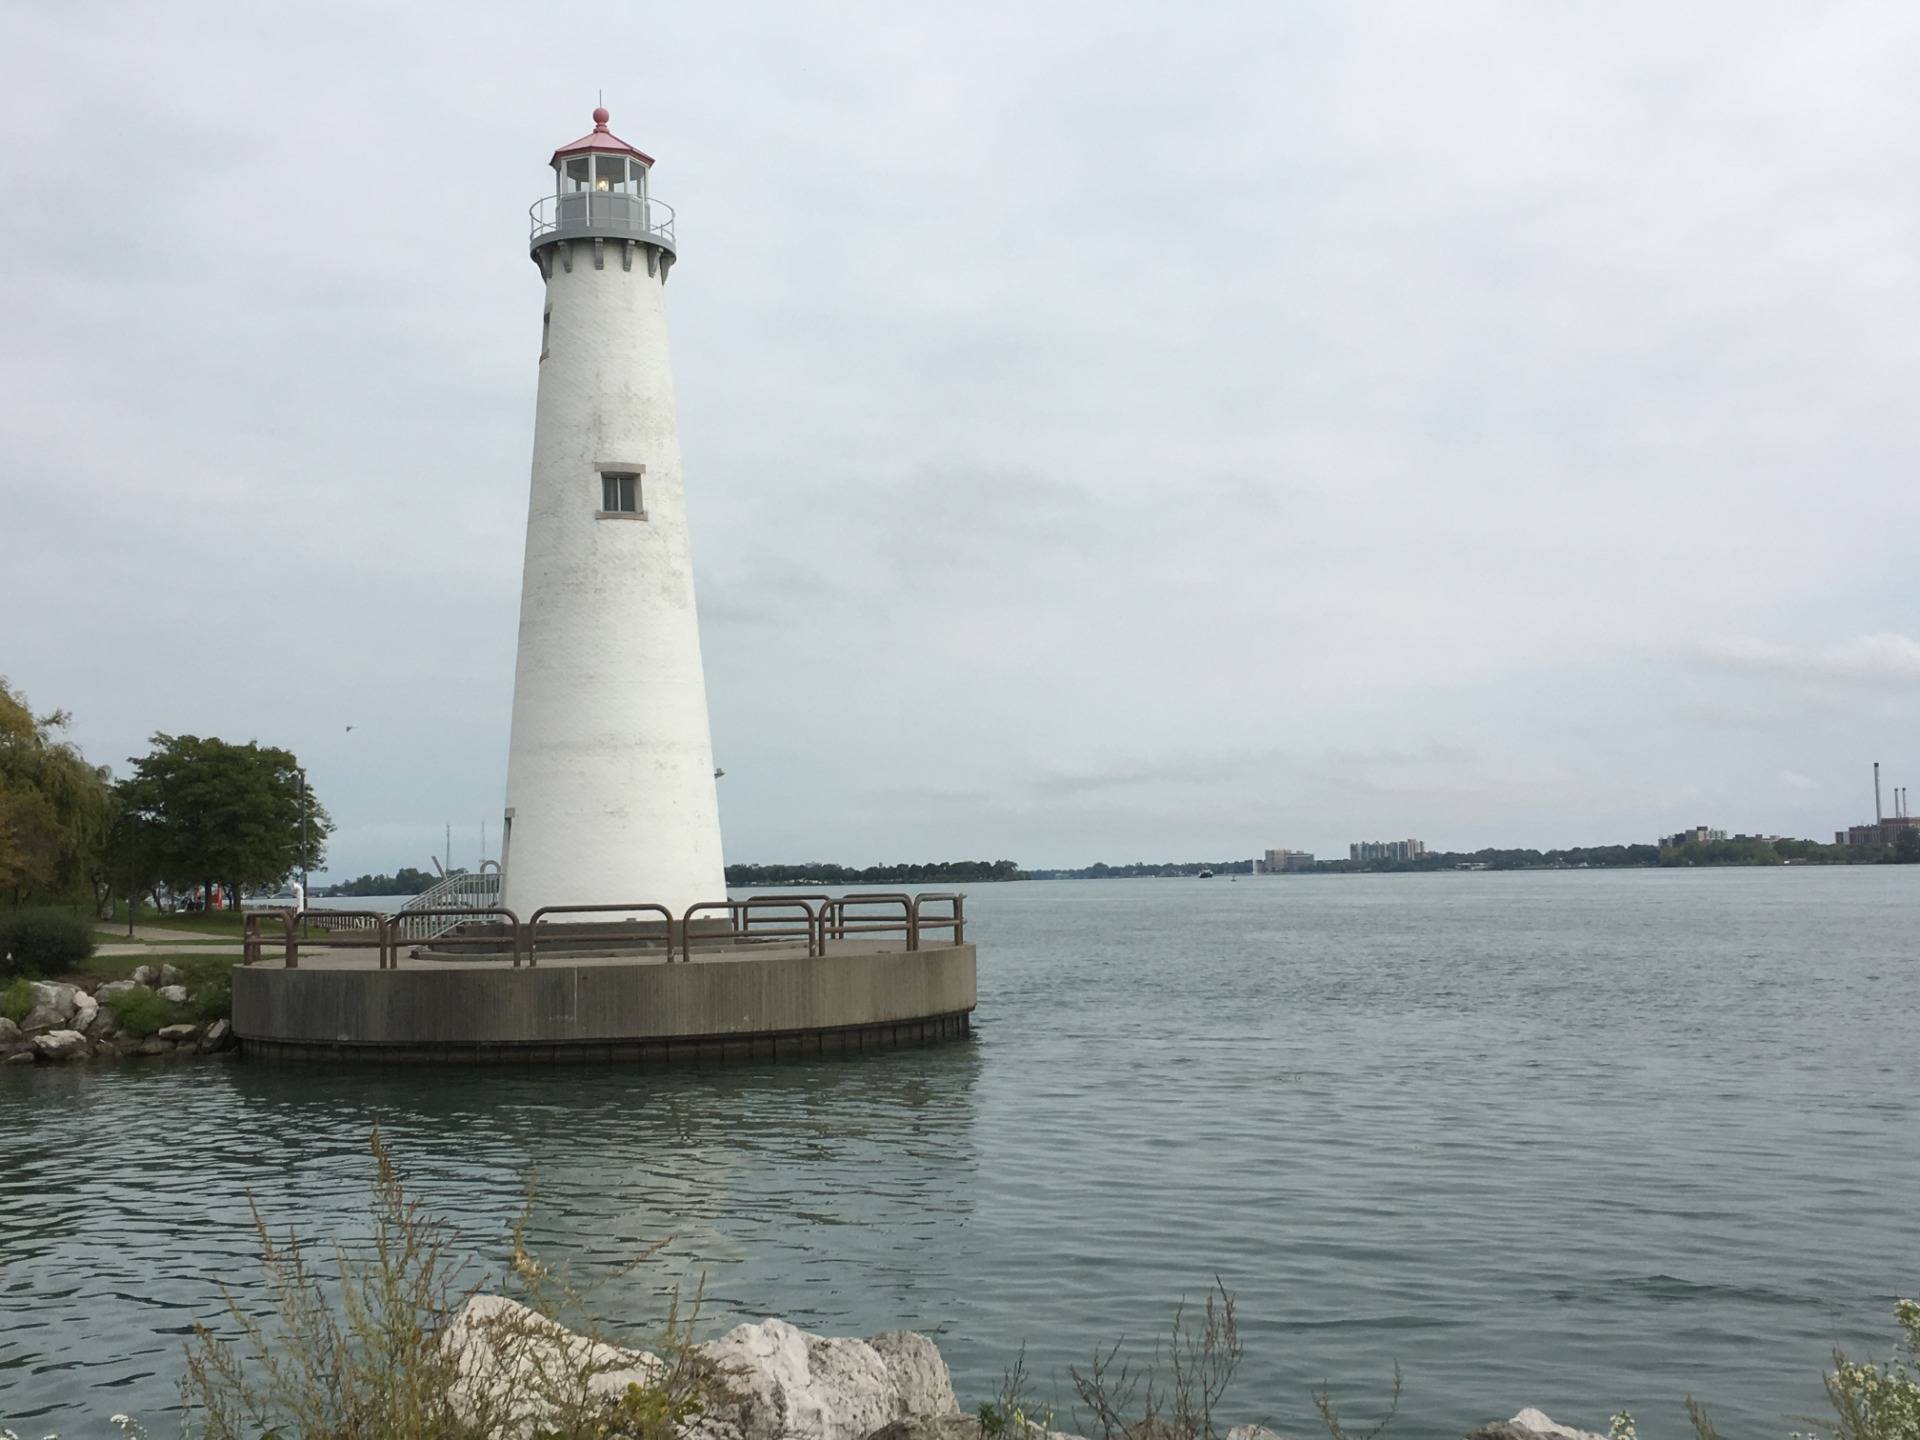 Lighthouse on the Detroit river